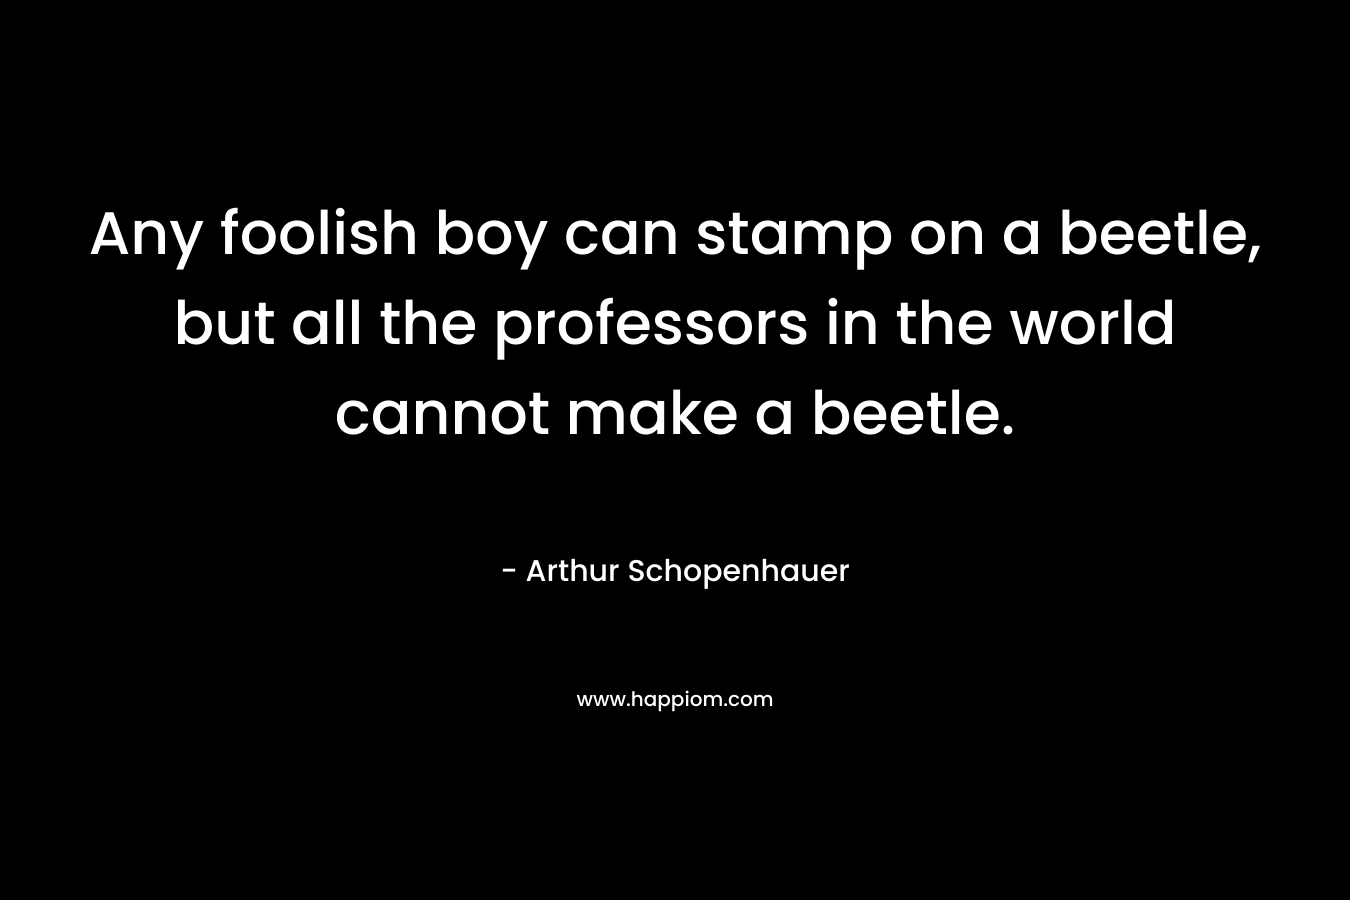 Any foolish boy can stamp on a beetle, but all the professors in the world cannot make a beetle.